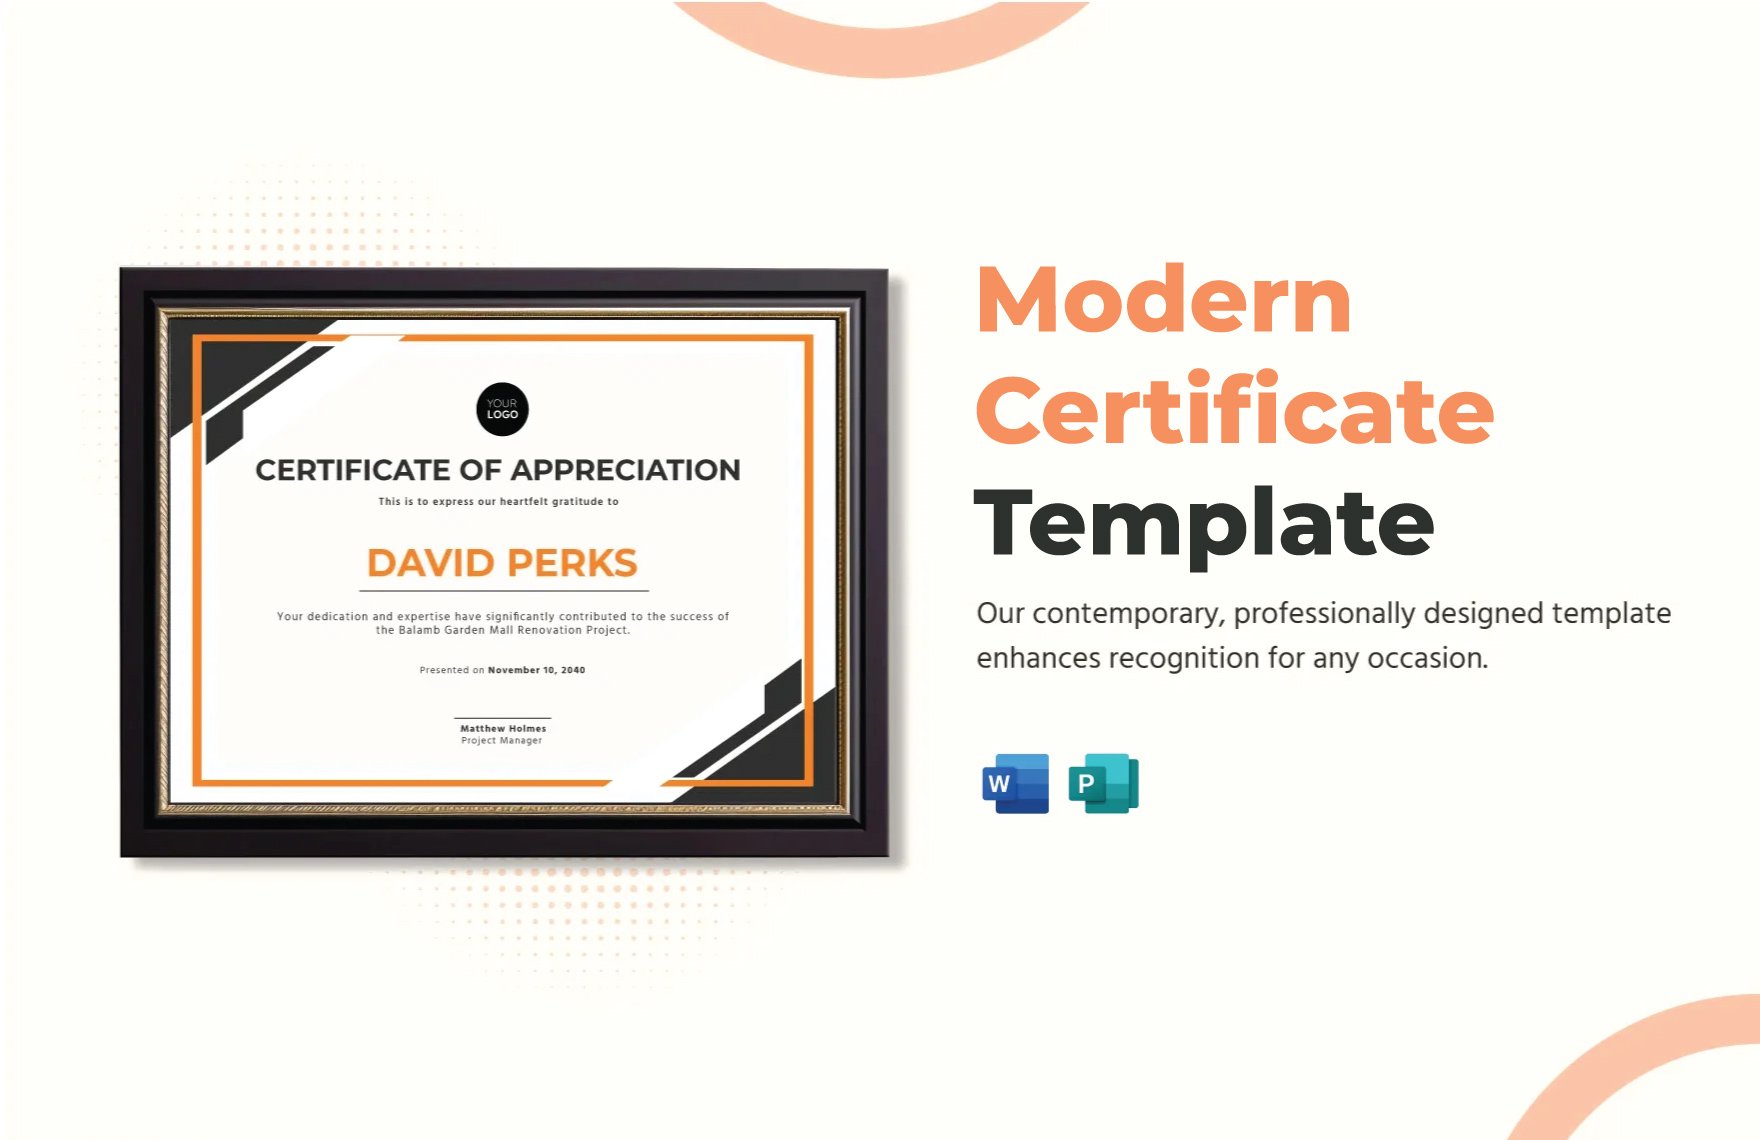 Free Modern Certificate Template in Word, Publisher